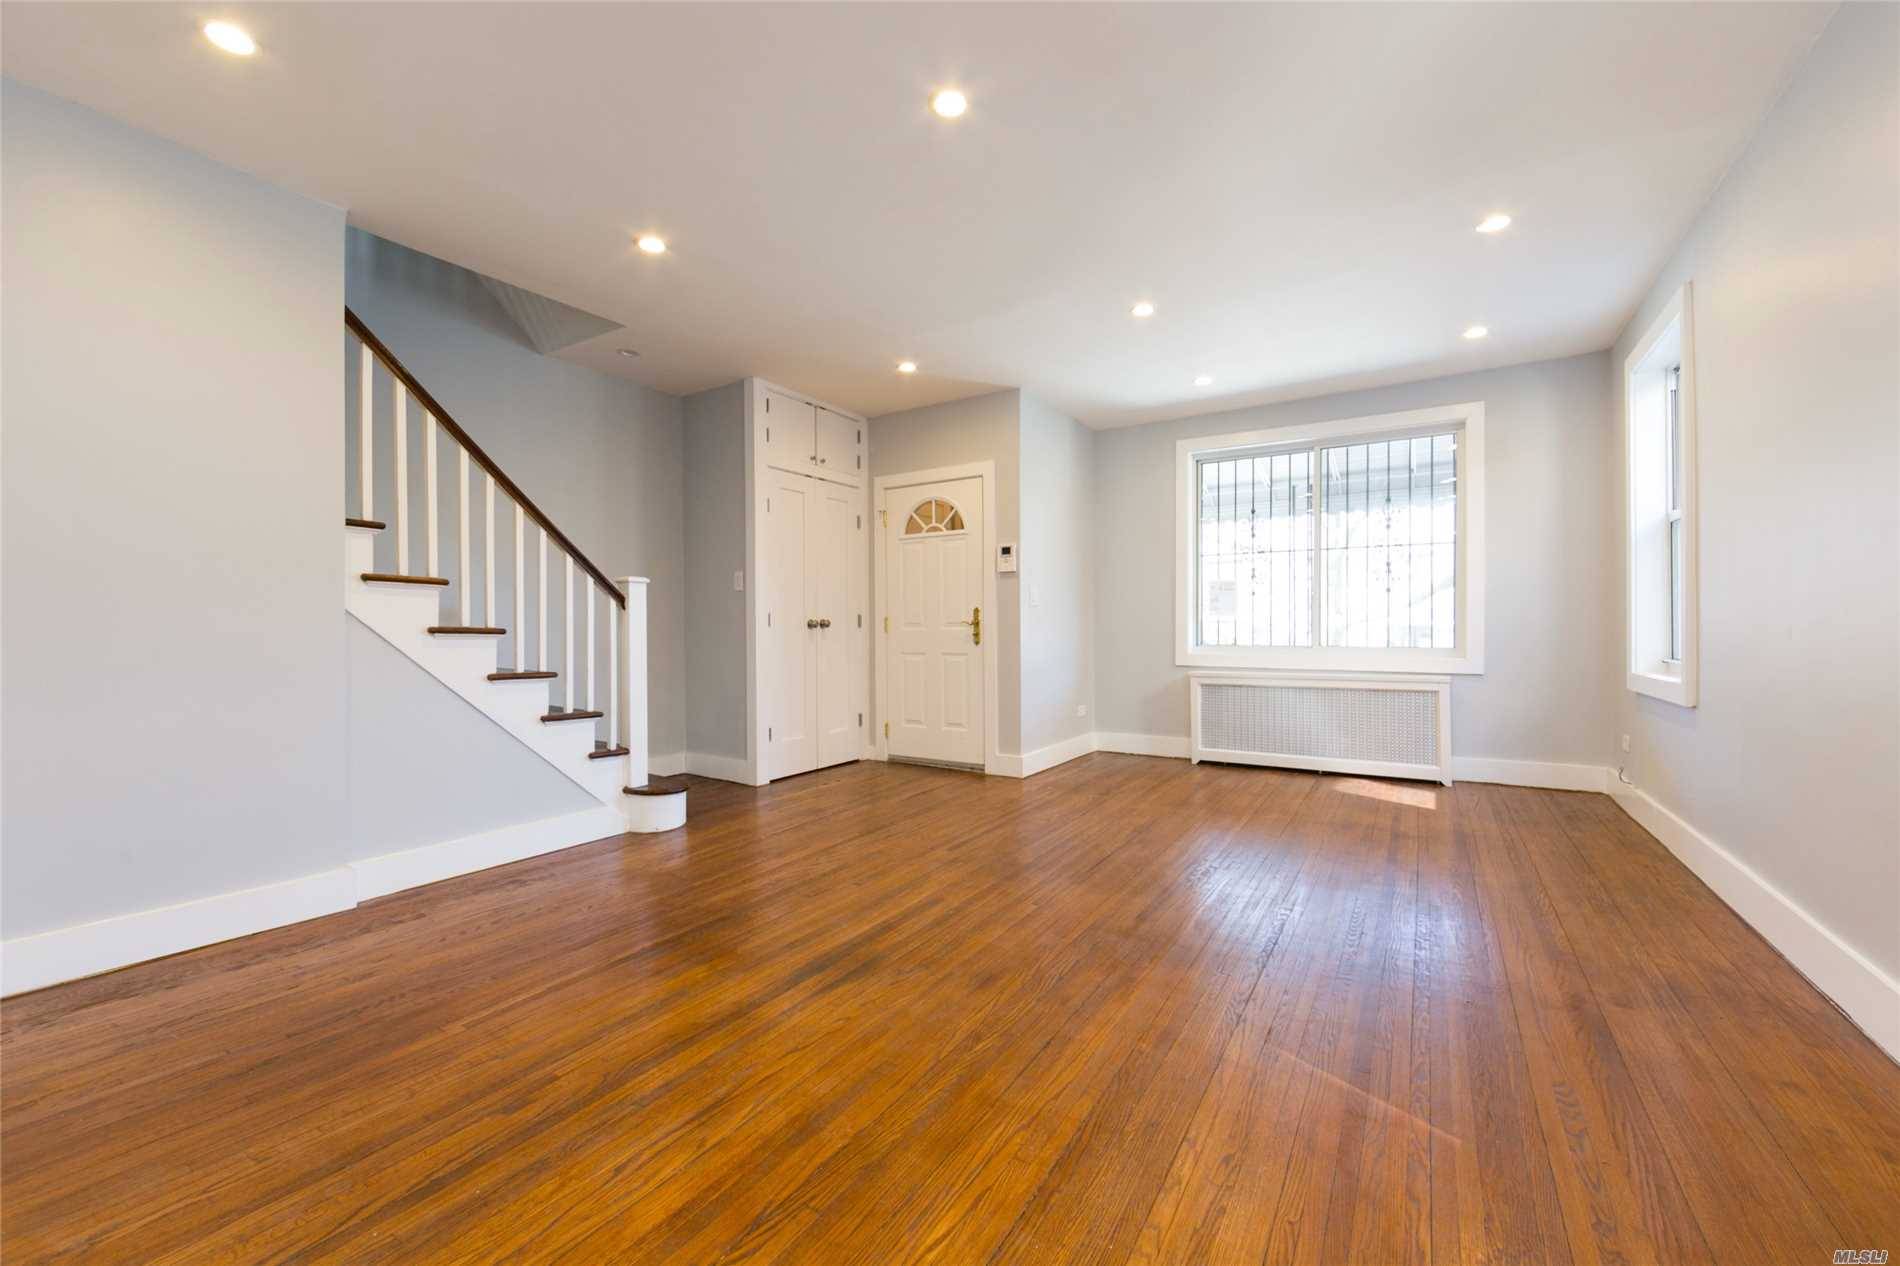 Luxuriously Renovated Move In Ready Brick Two Family Townhouse Nestled On A Beautiful Tree Lined Street Of Forest Hills.